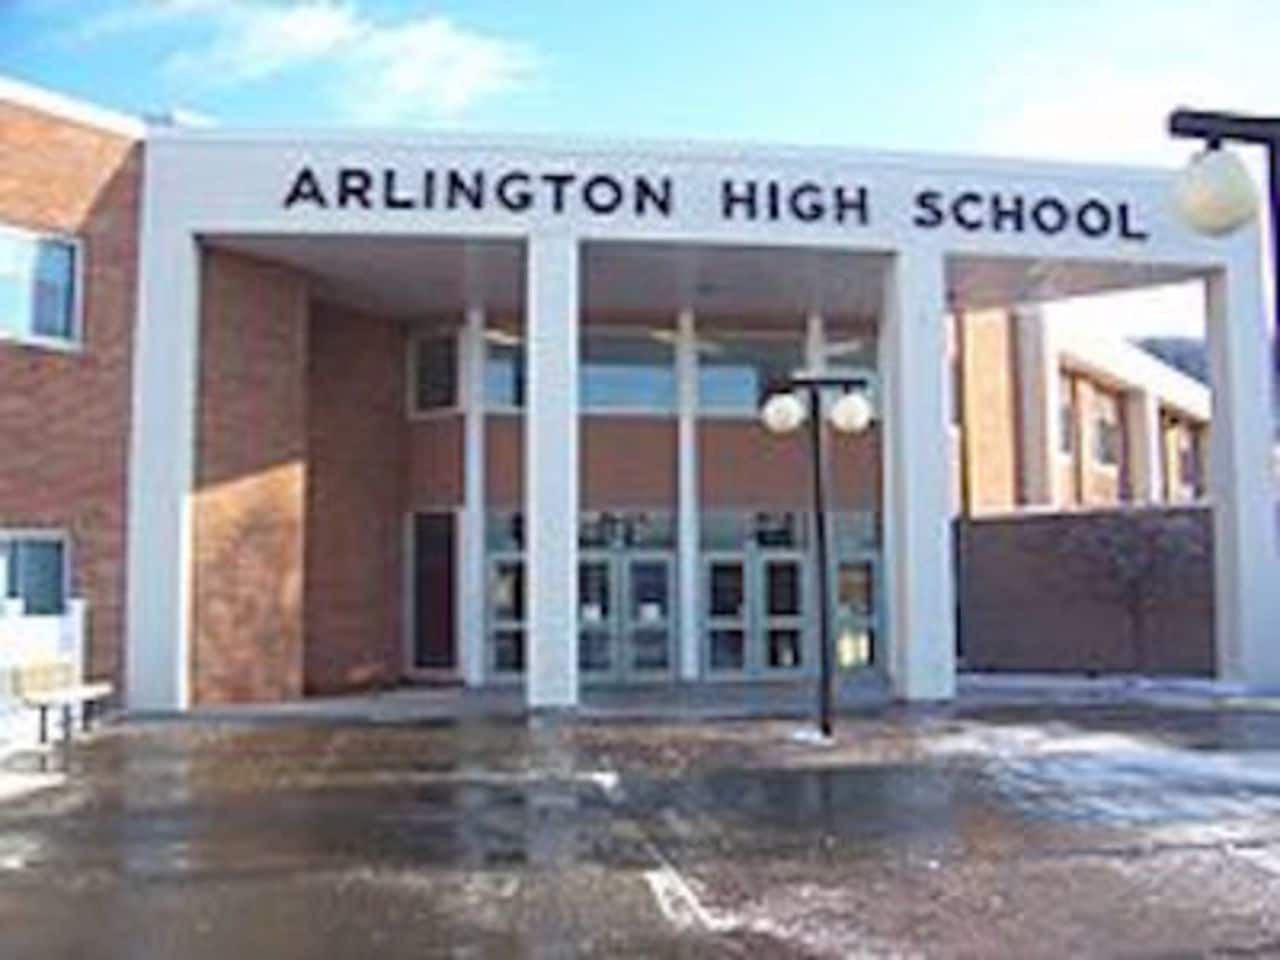 Arlington High School where the incident took place.